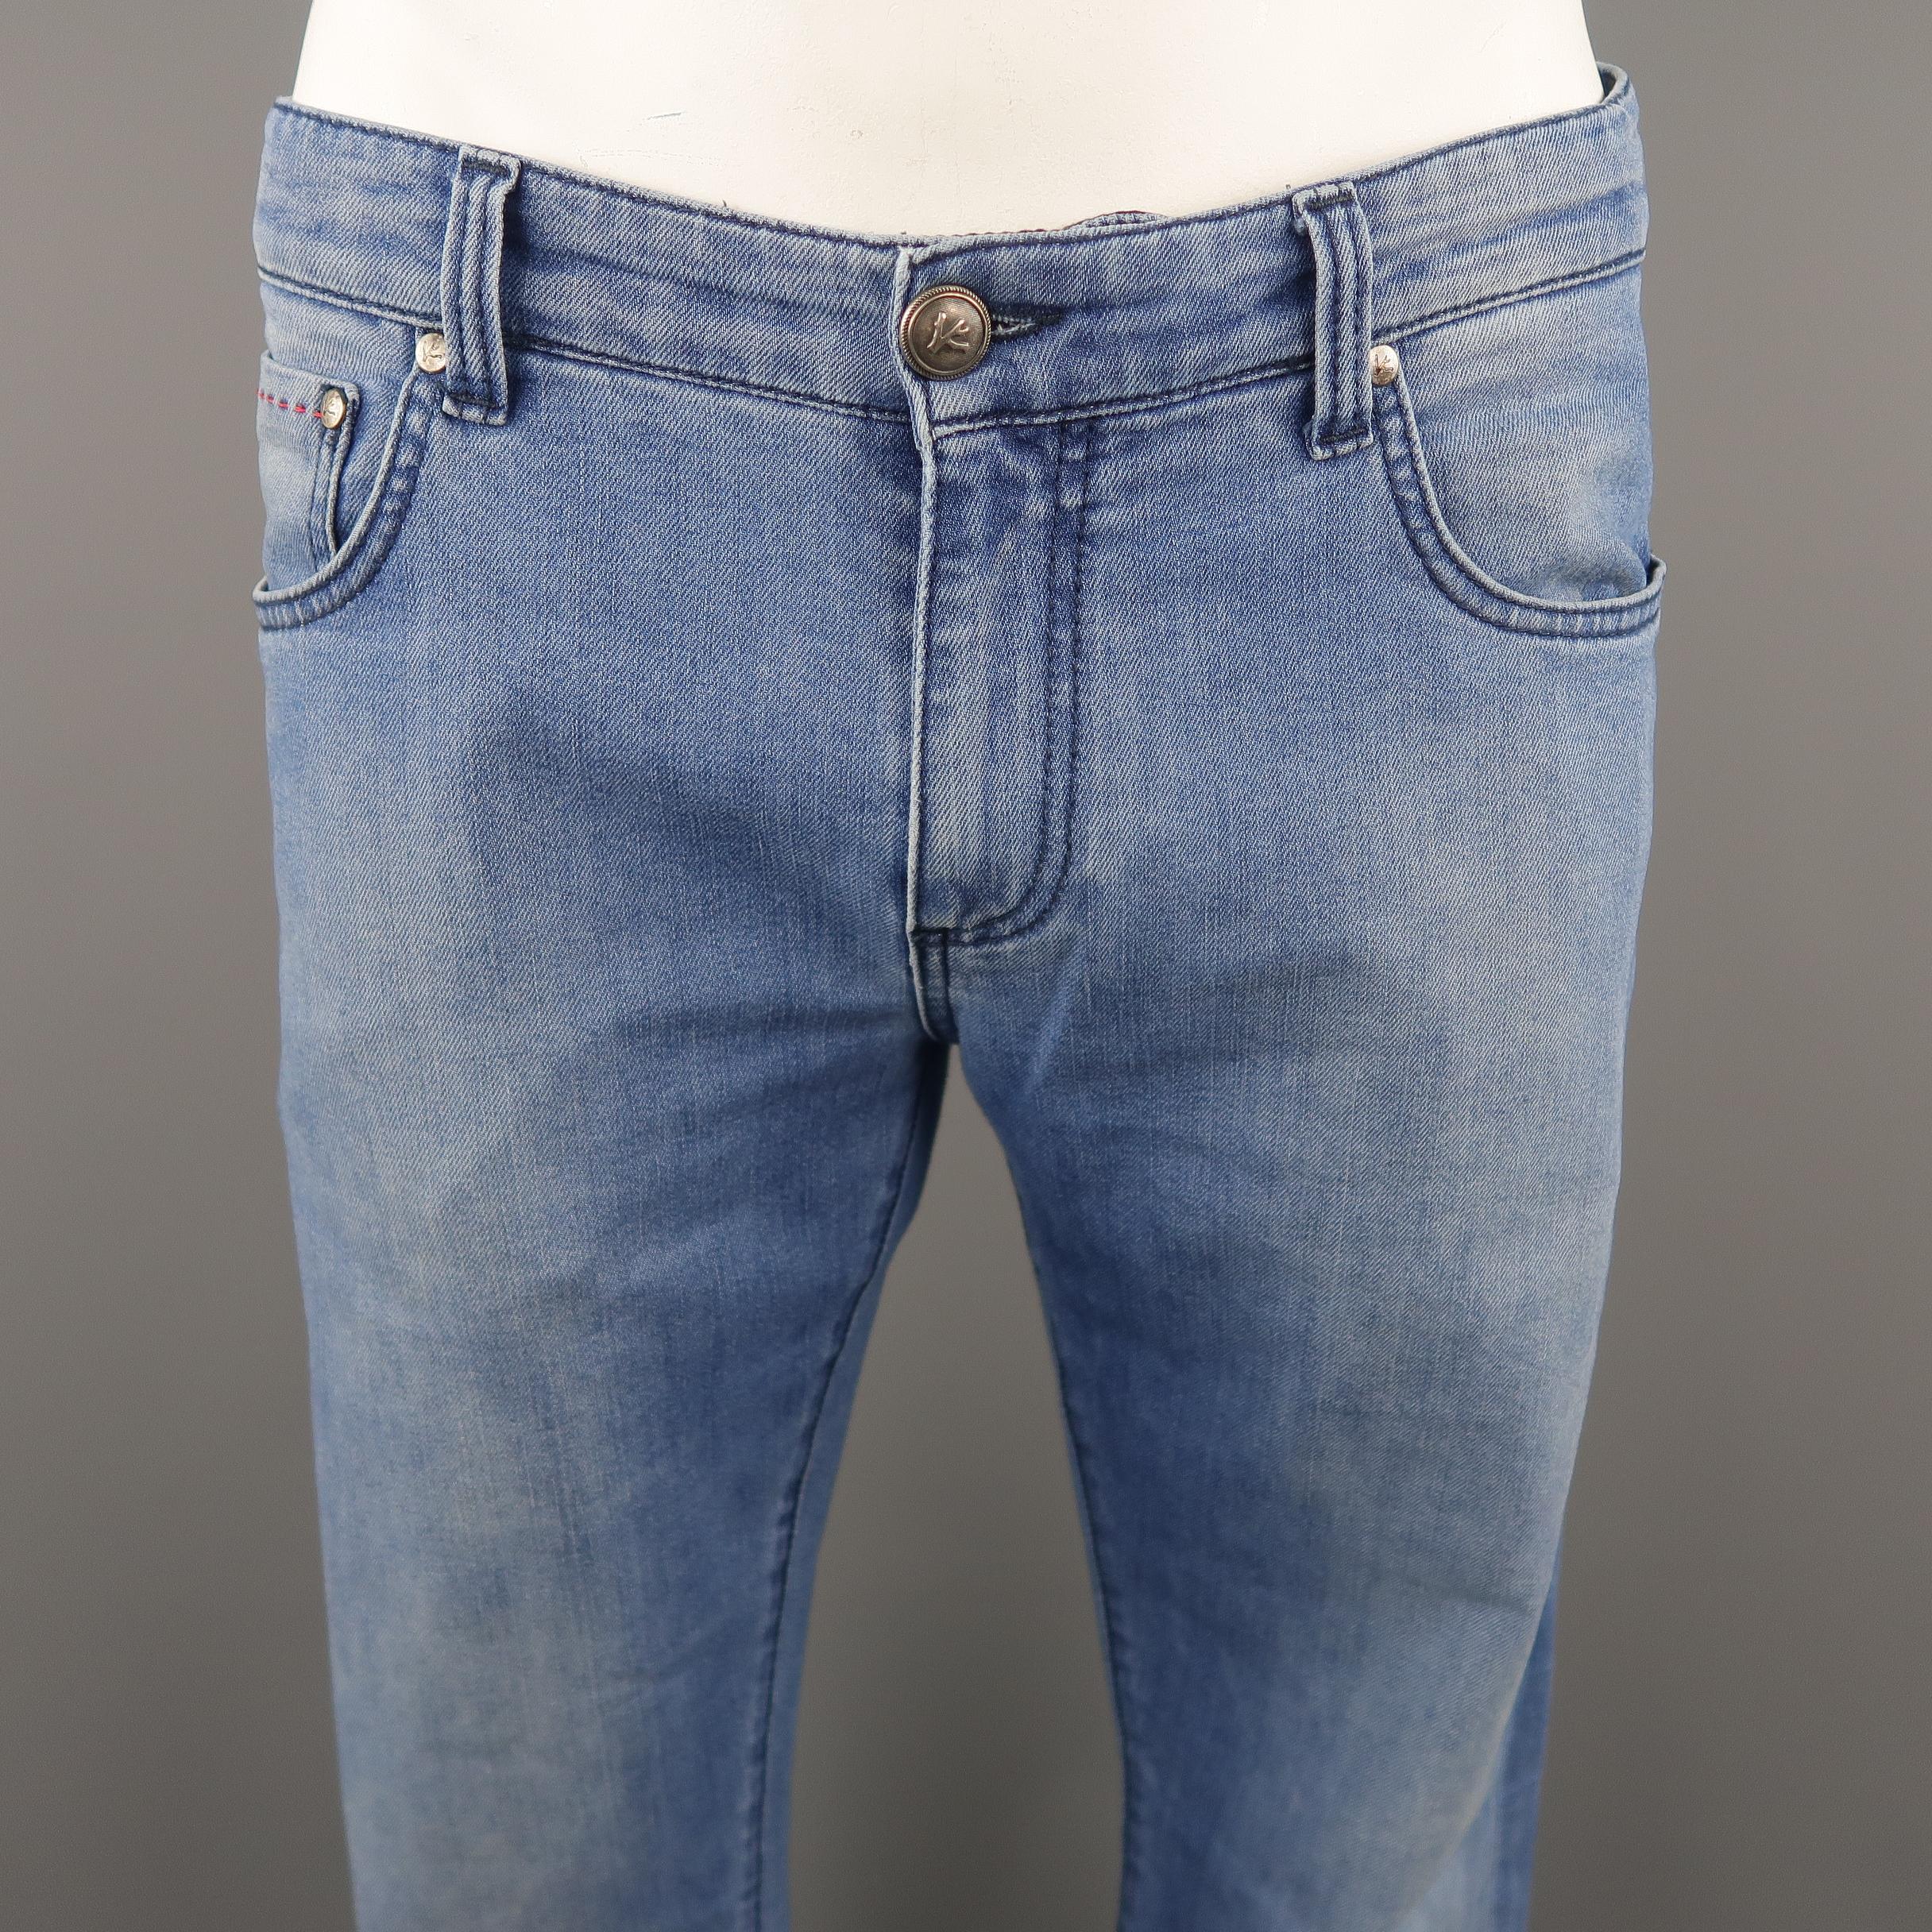 ISAIA  jeans come in blue washed selvedge denim material, zip fly. Made in Italy.
 
Excellent  Pre-Owned Condition.
Marked: 34
 
Measurements:
 
Waist:  34  in.
Rise: 10  in.
Inseam:  35  in.
